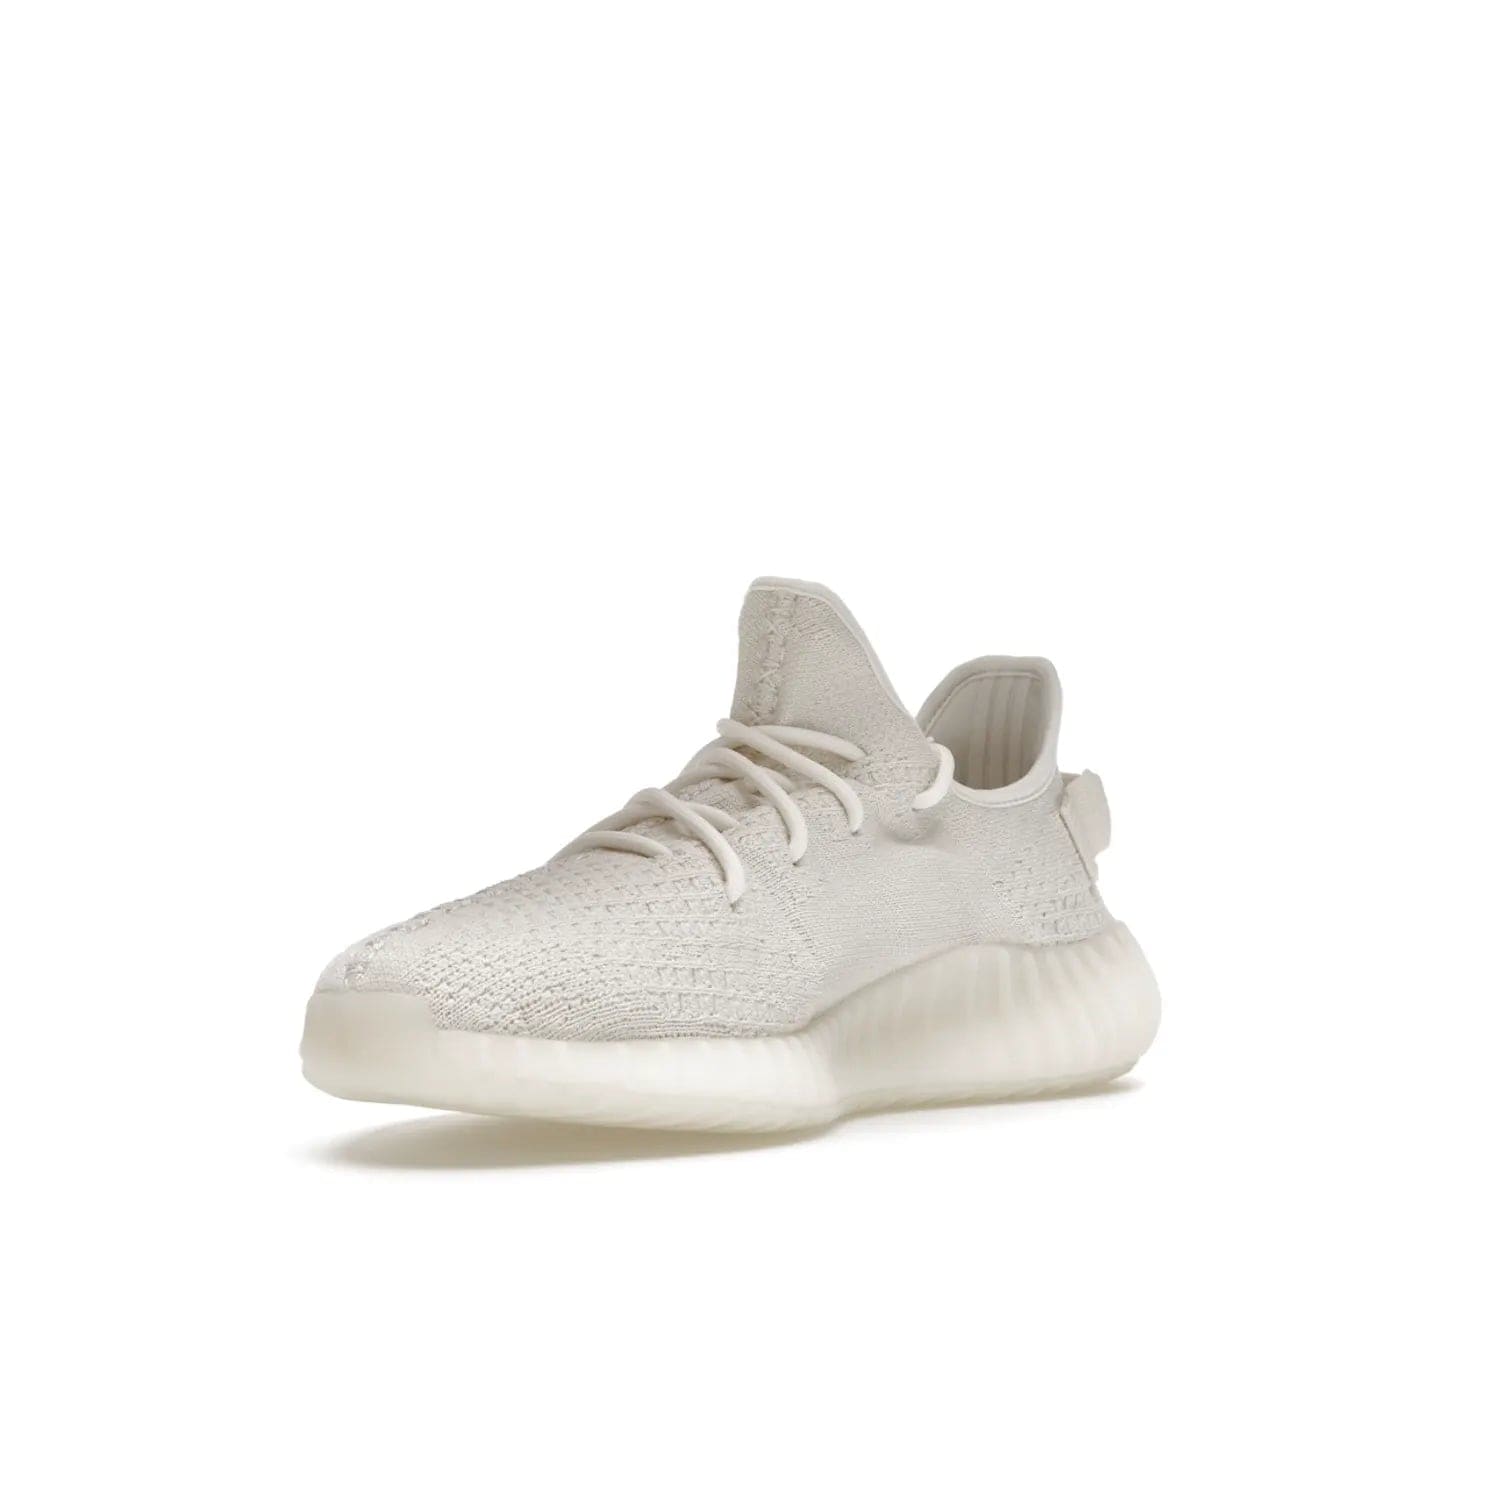 adidas Yeezy Boost 350 V2 Bone - Image 14 - Only at www.BallersClubKickz.com - Grab the stylish and comfortable adidas Yeezy Boost 350 V2 Bone in March 2022. This sneaker features a triple white Primeknit upper, mesh side stripes and canvas heel tabs, sitting atop a semi-translucent sole with Boost technology. Sure to keep your feet comfortable and stylish!